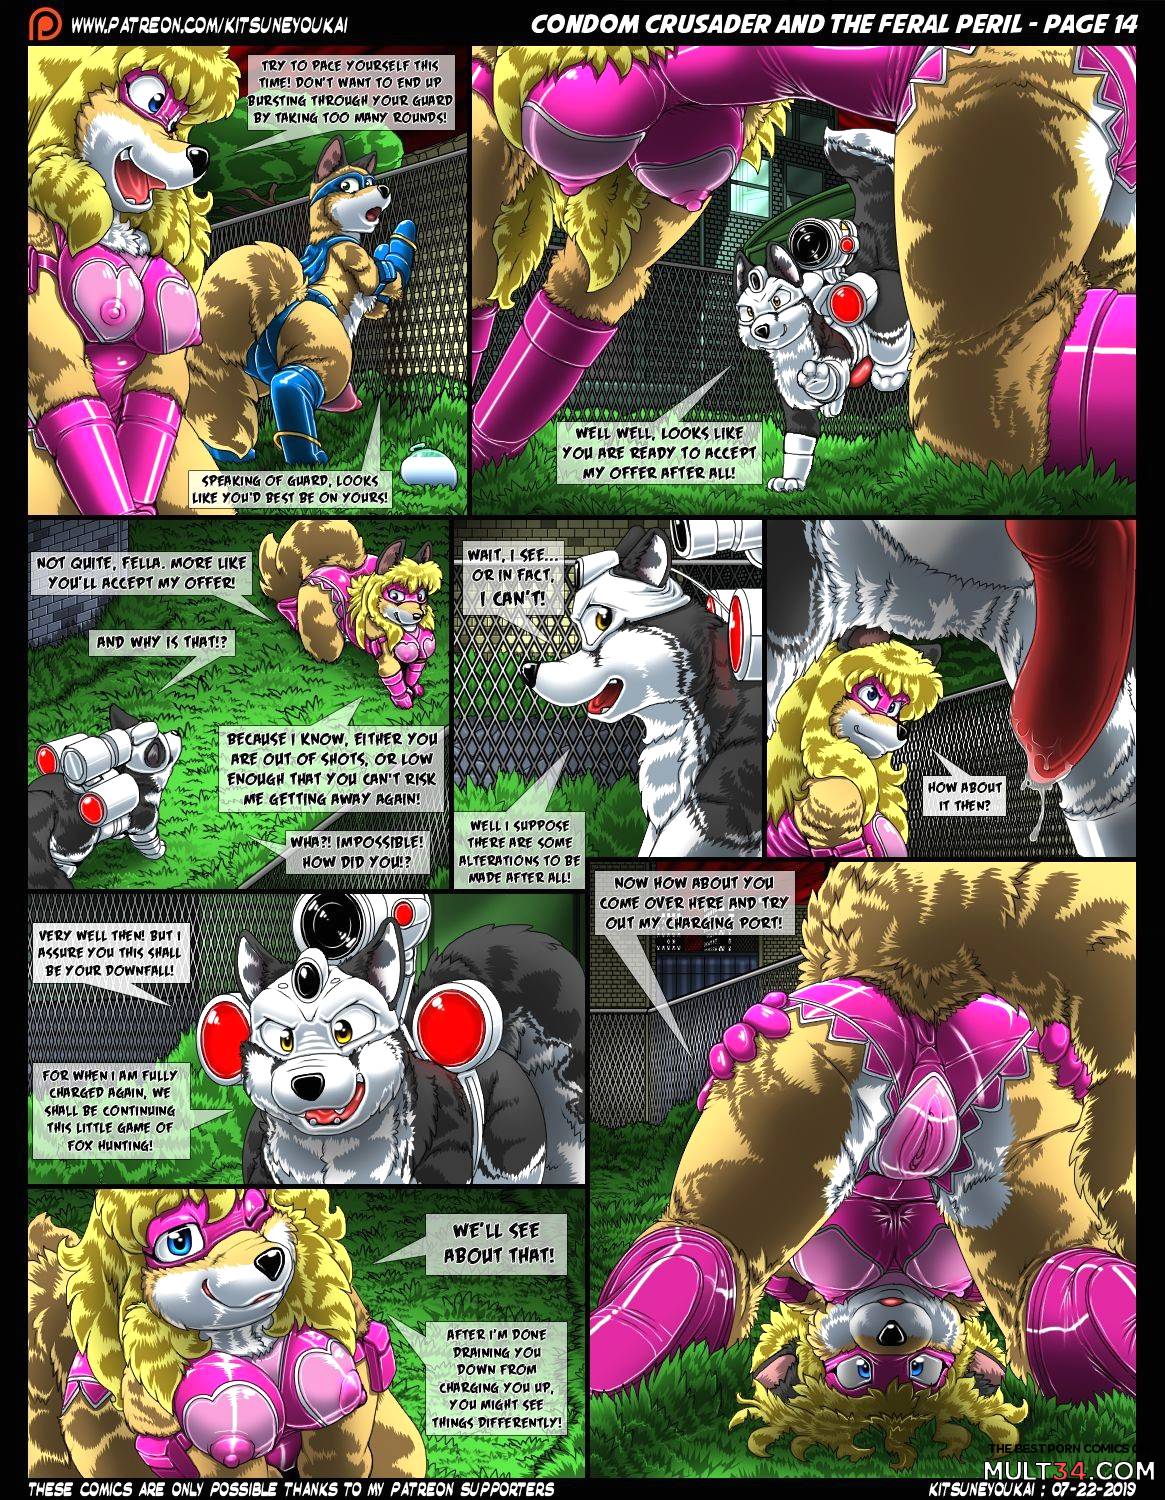 Condom Crusader and the Feral Peril page 14